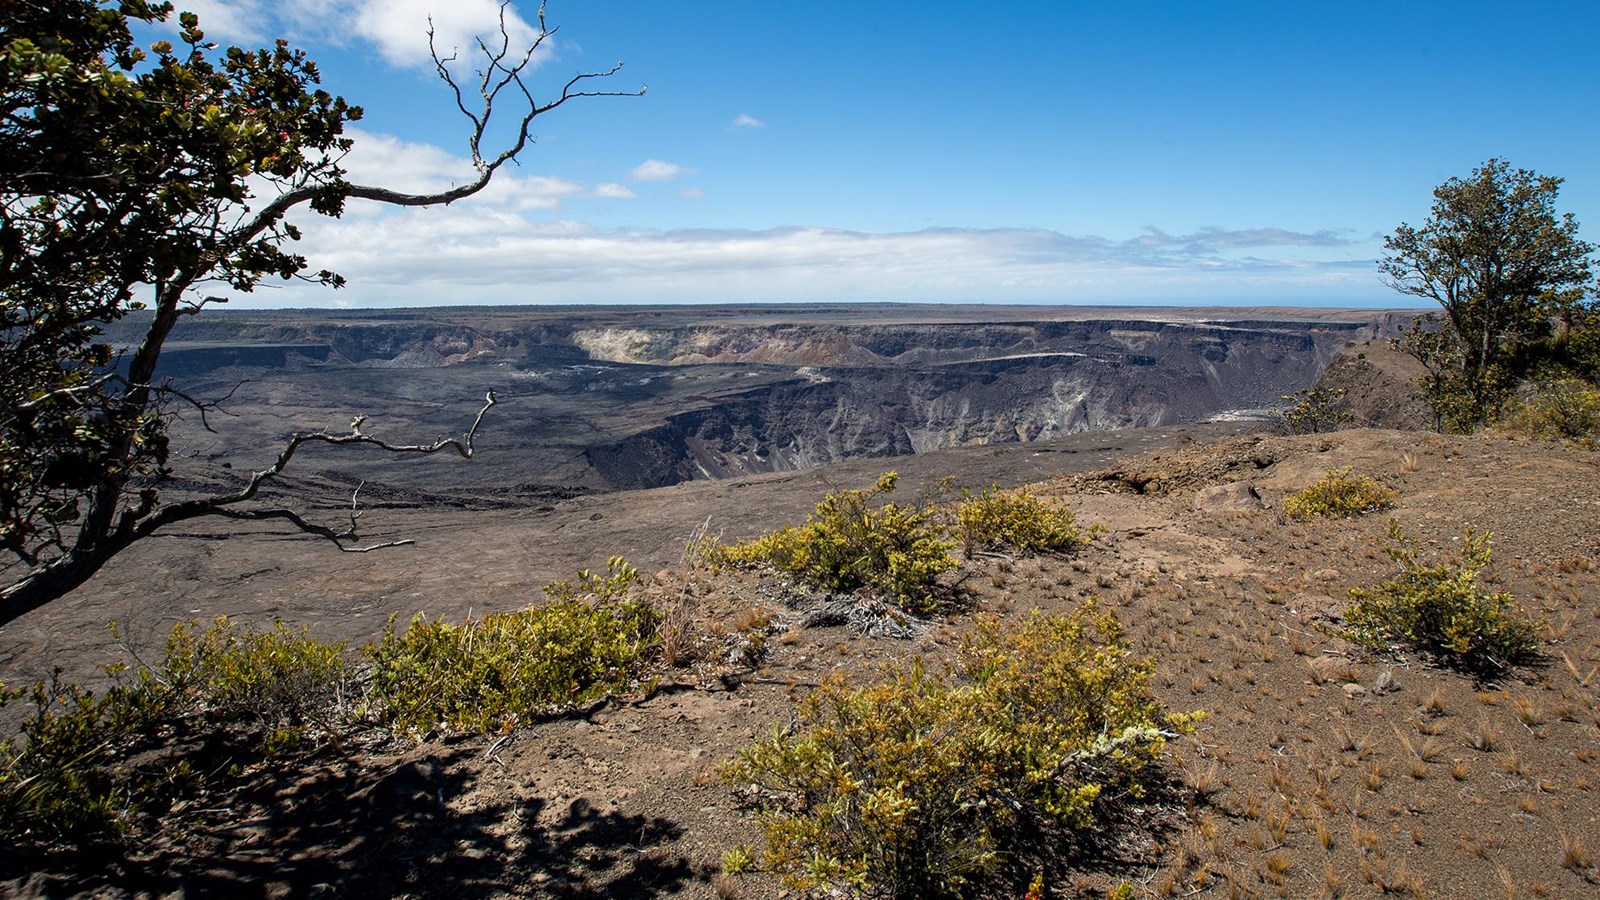 A deep crater within a volcanic caldera with a tree in the foreground